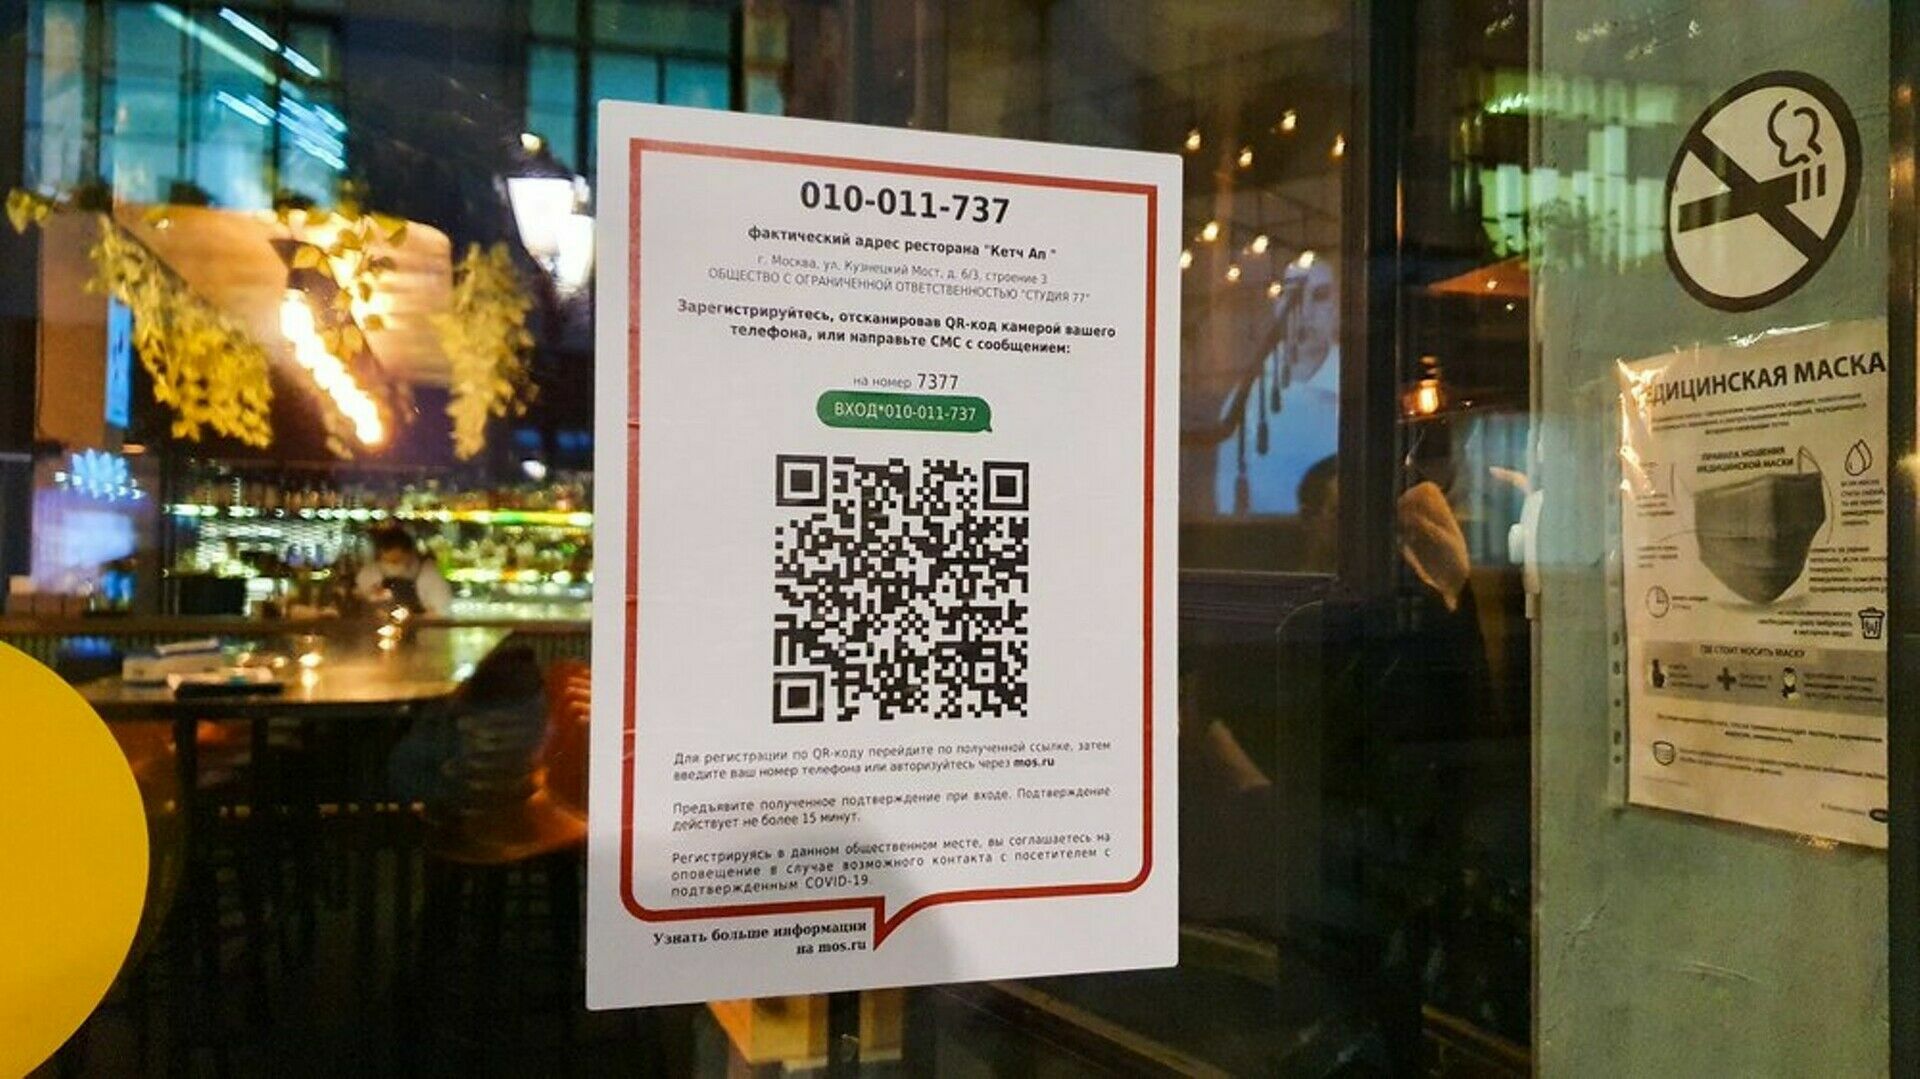 From July 19, Moscow will cancel QR-codes for visiting restaurants